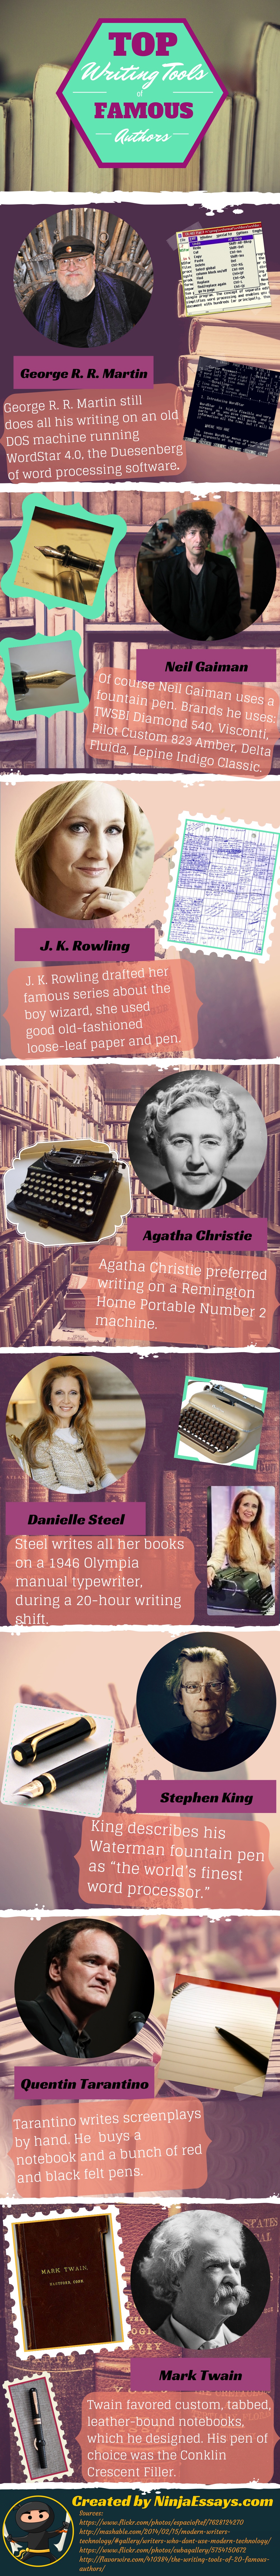 Top Writing Tools of Famous Authors